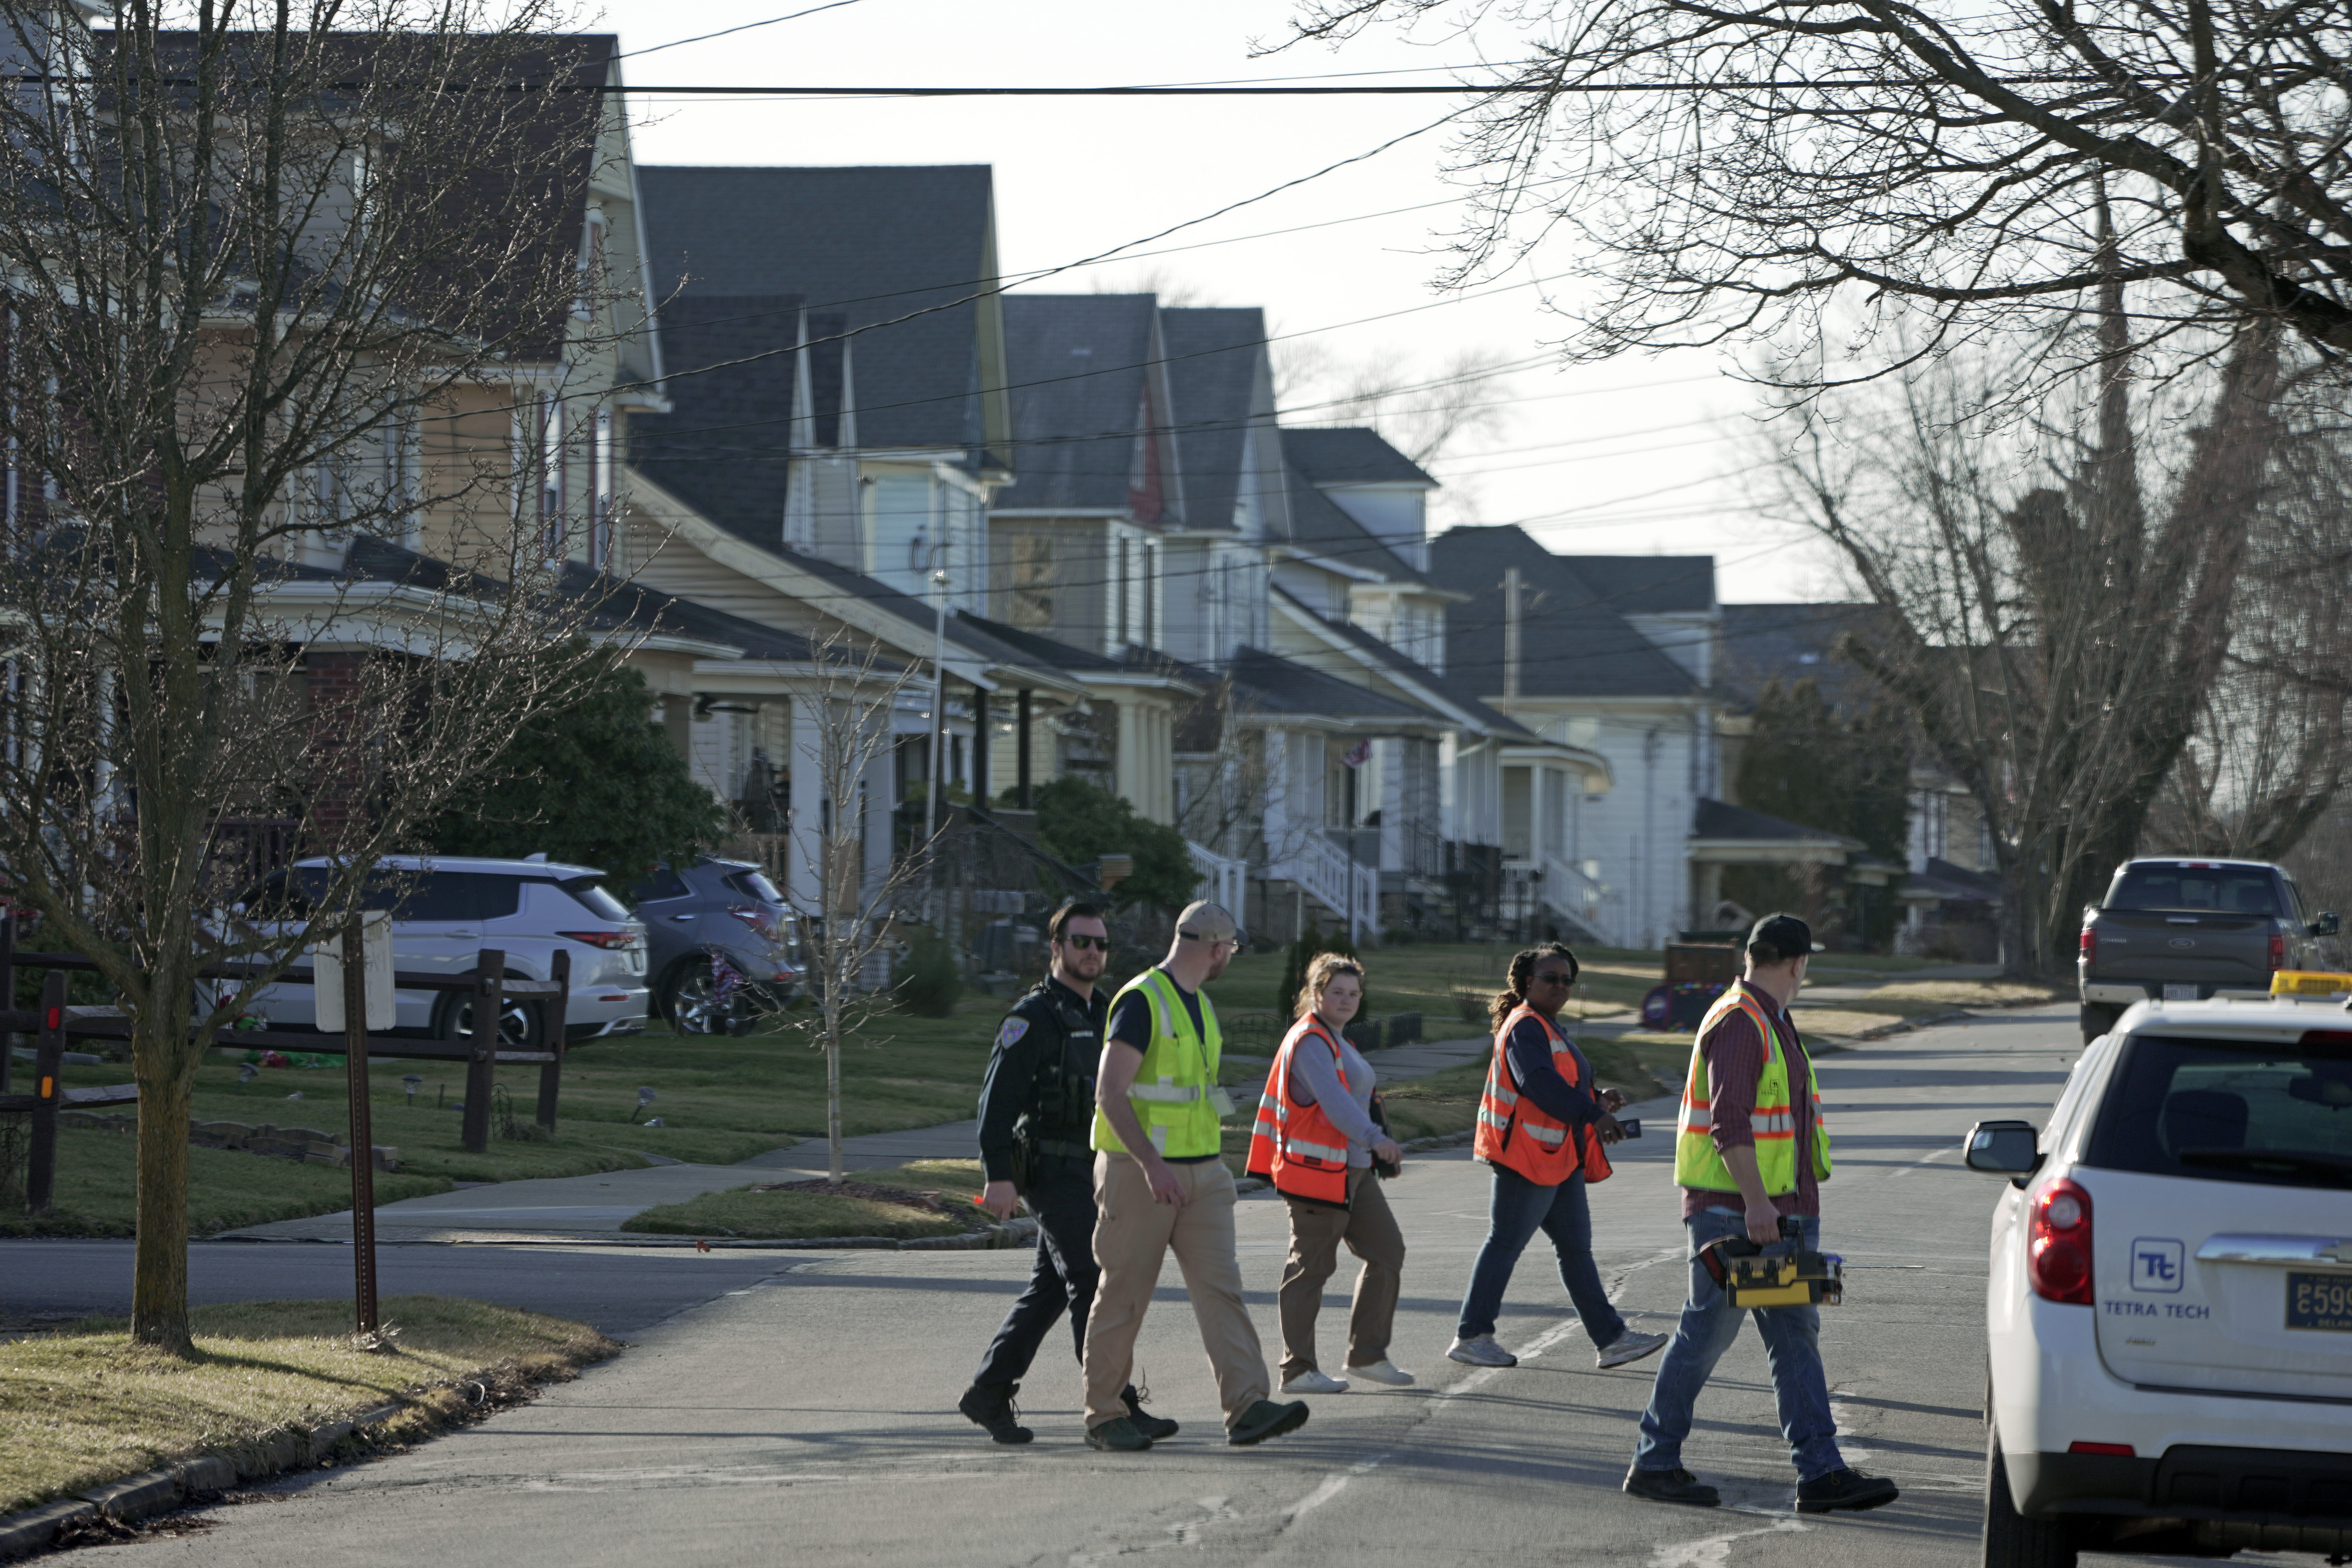 People in neon safety vests walk across a suburban street.